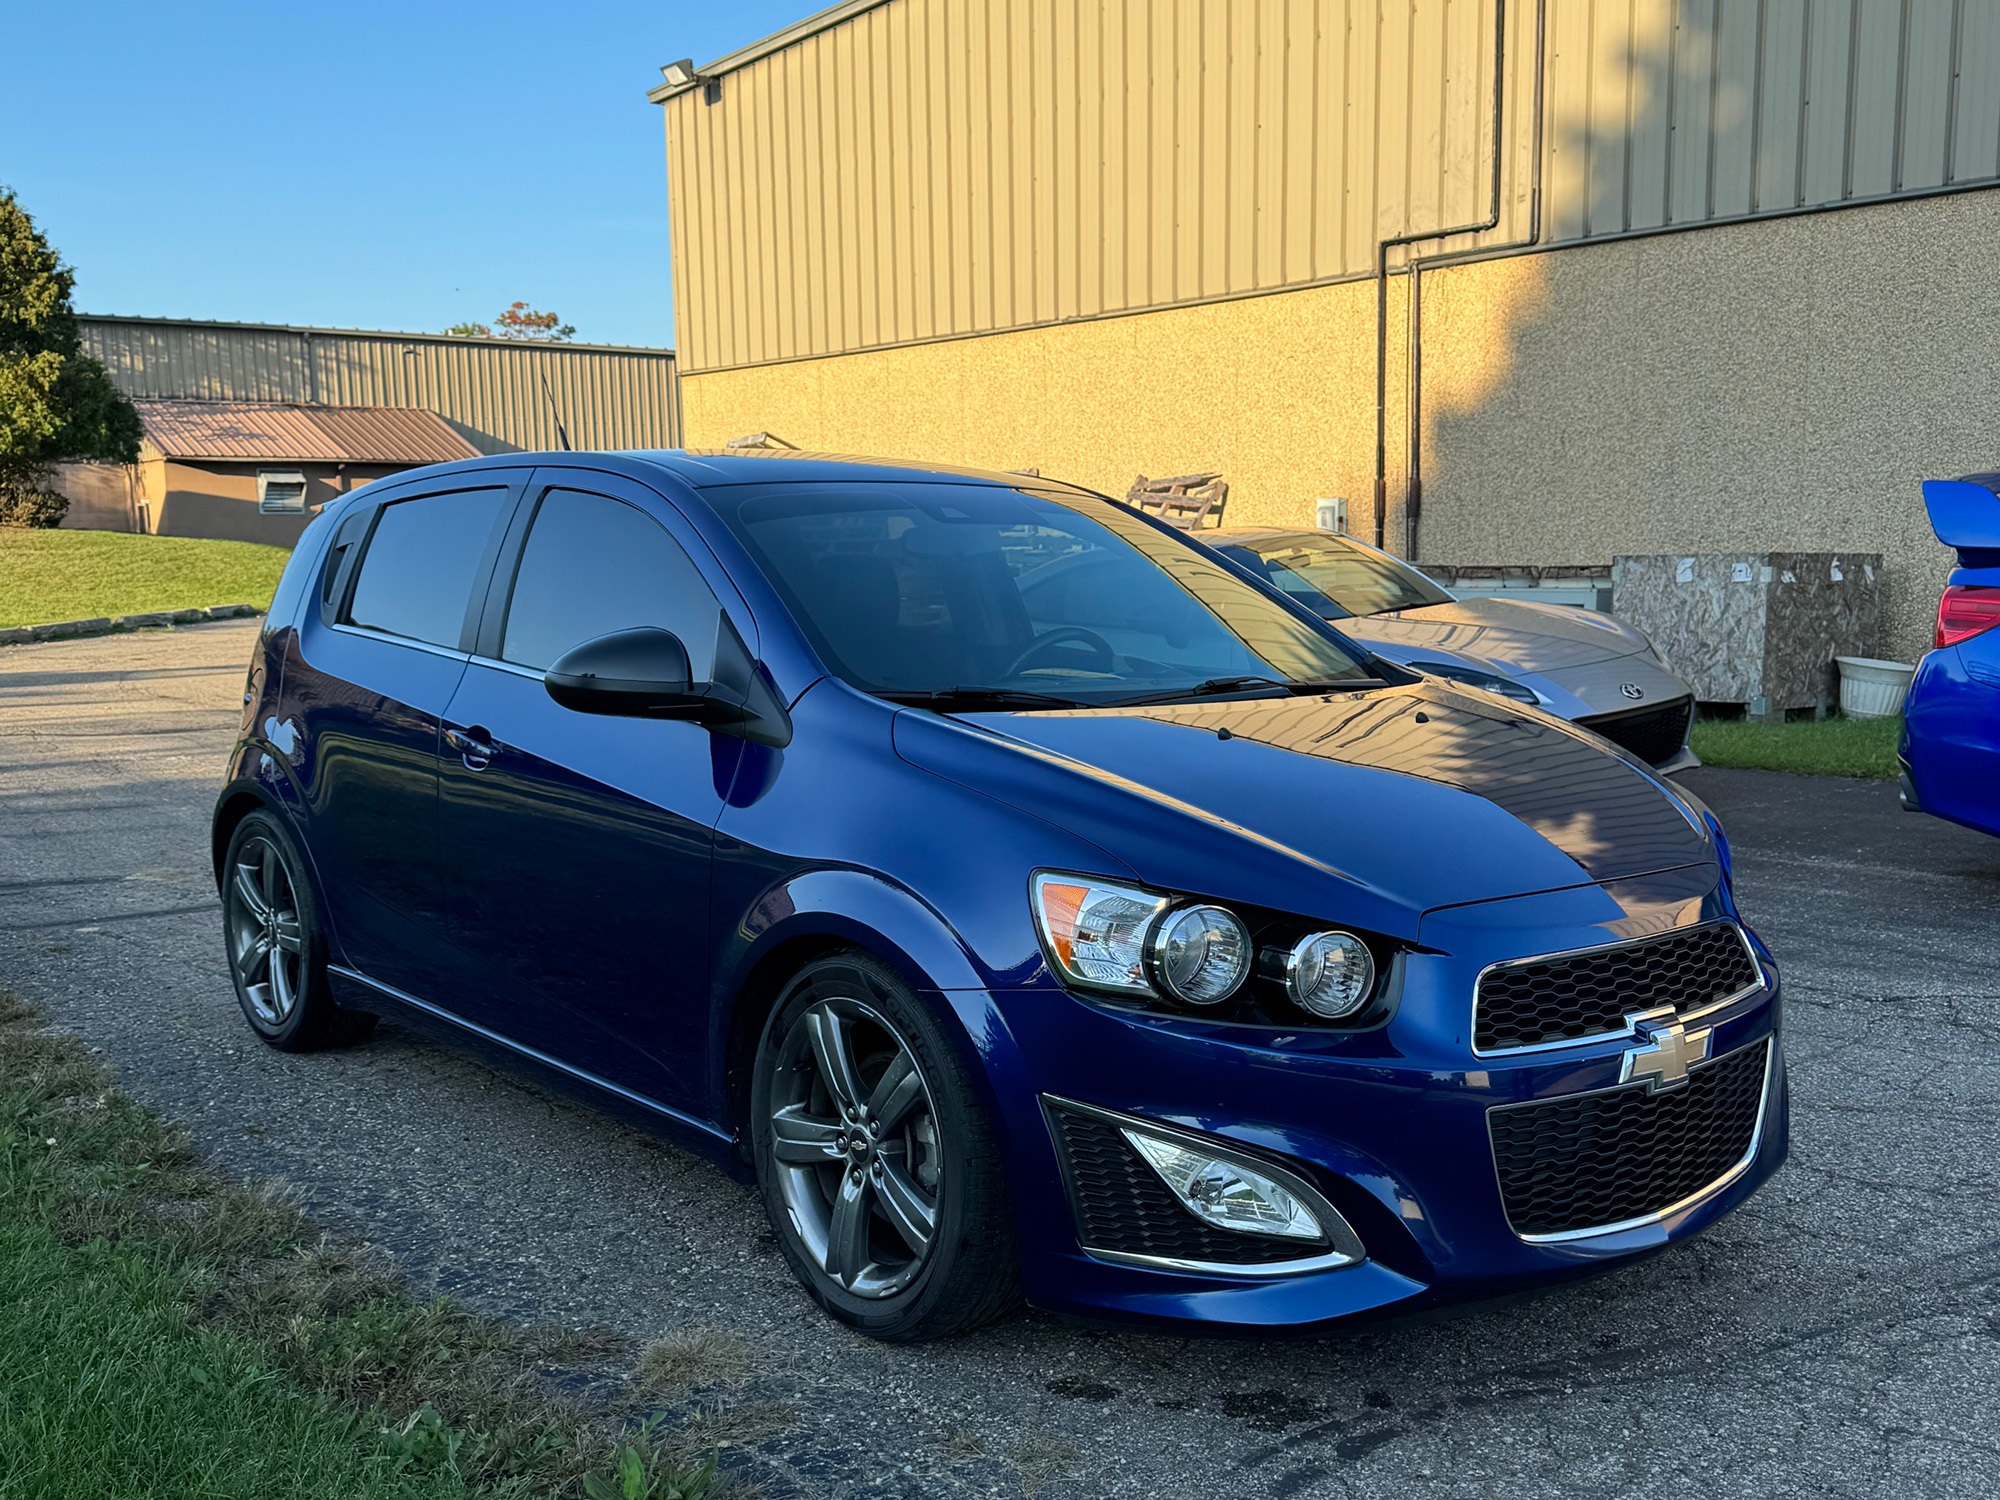 2014 Chevy Sonic RS 6 Speed Manual - 